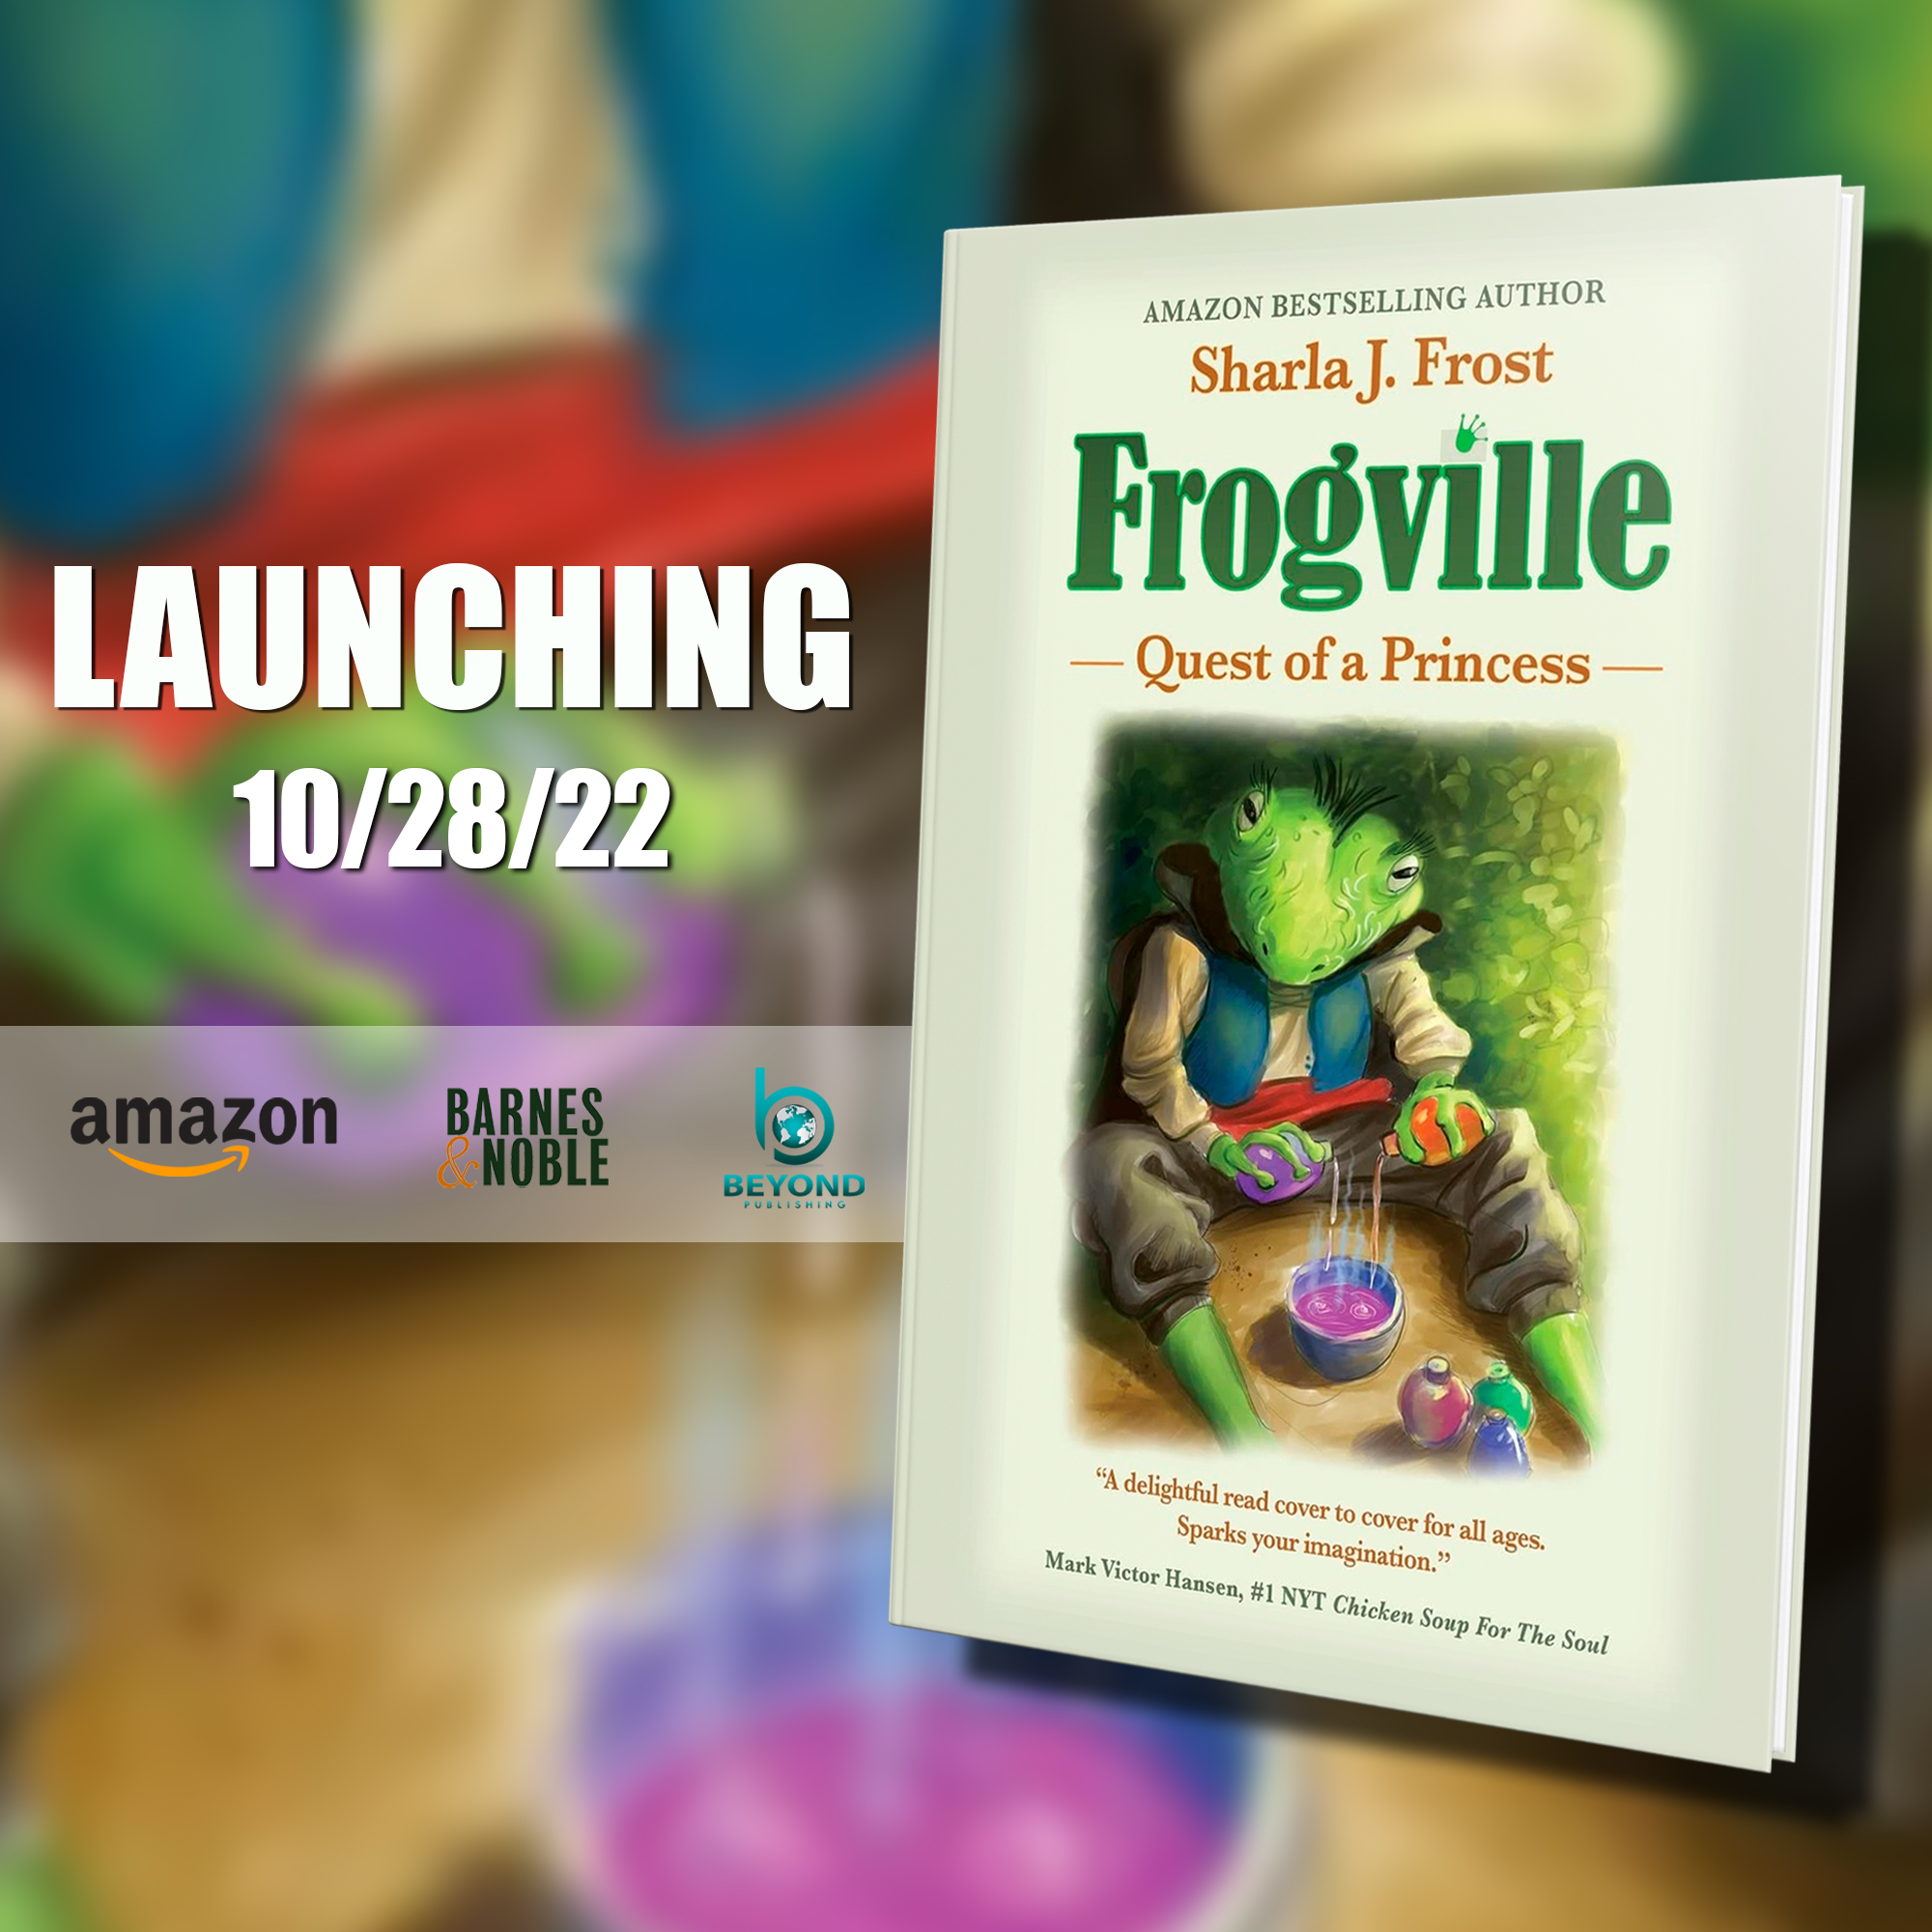 ‘Frogville’, Quest of a Princess Brings Adventure and Fun for the 8- to 13-Year-Old Crowd, Continues the Adventures of Lily, the Girl Turned Frog